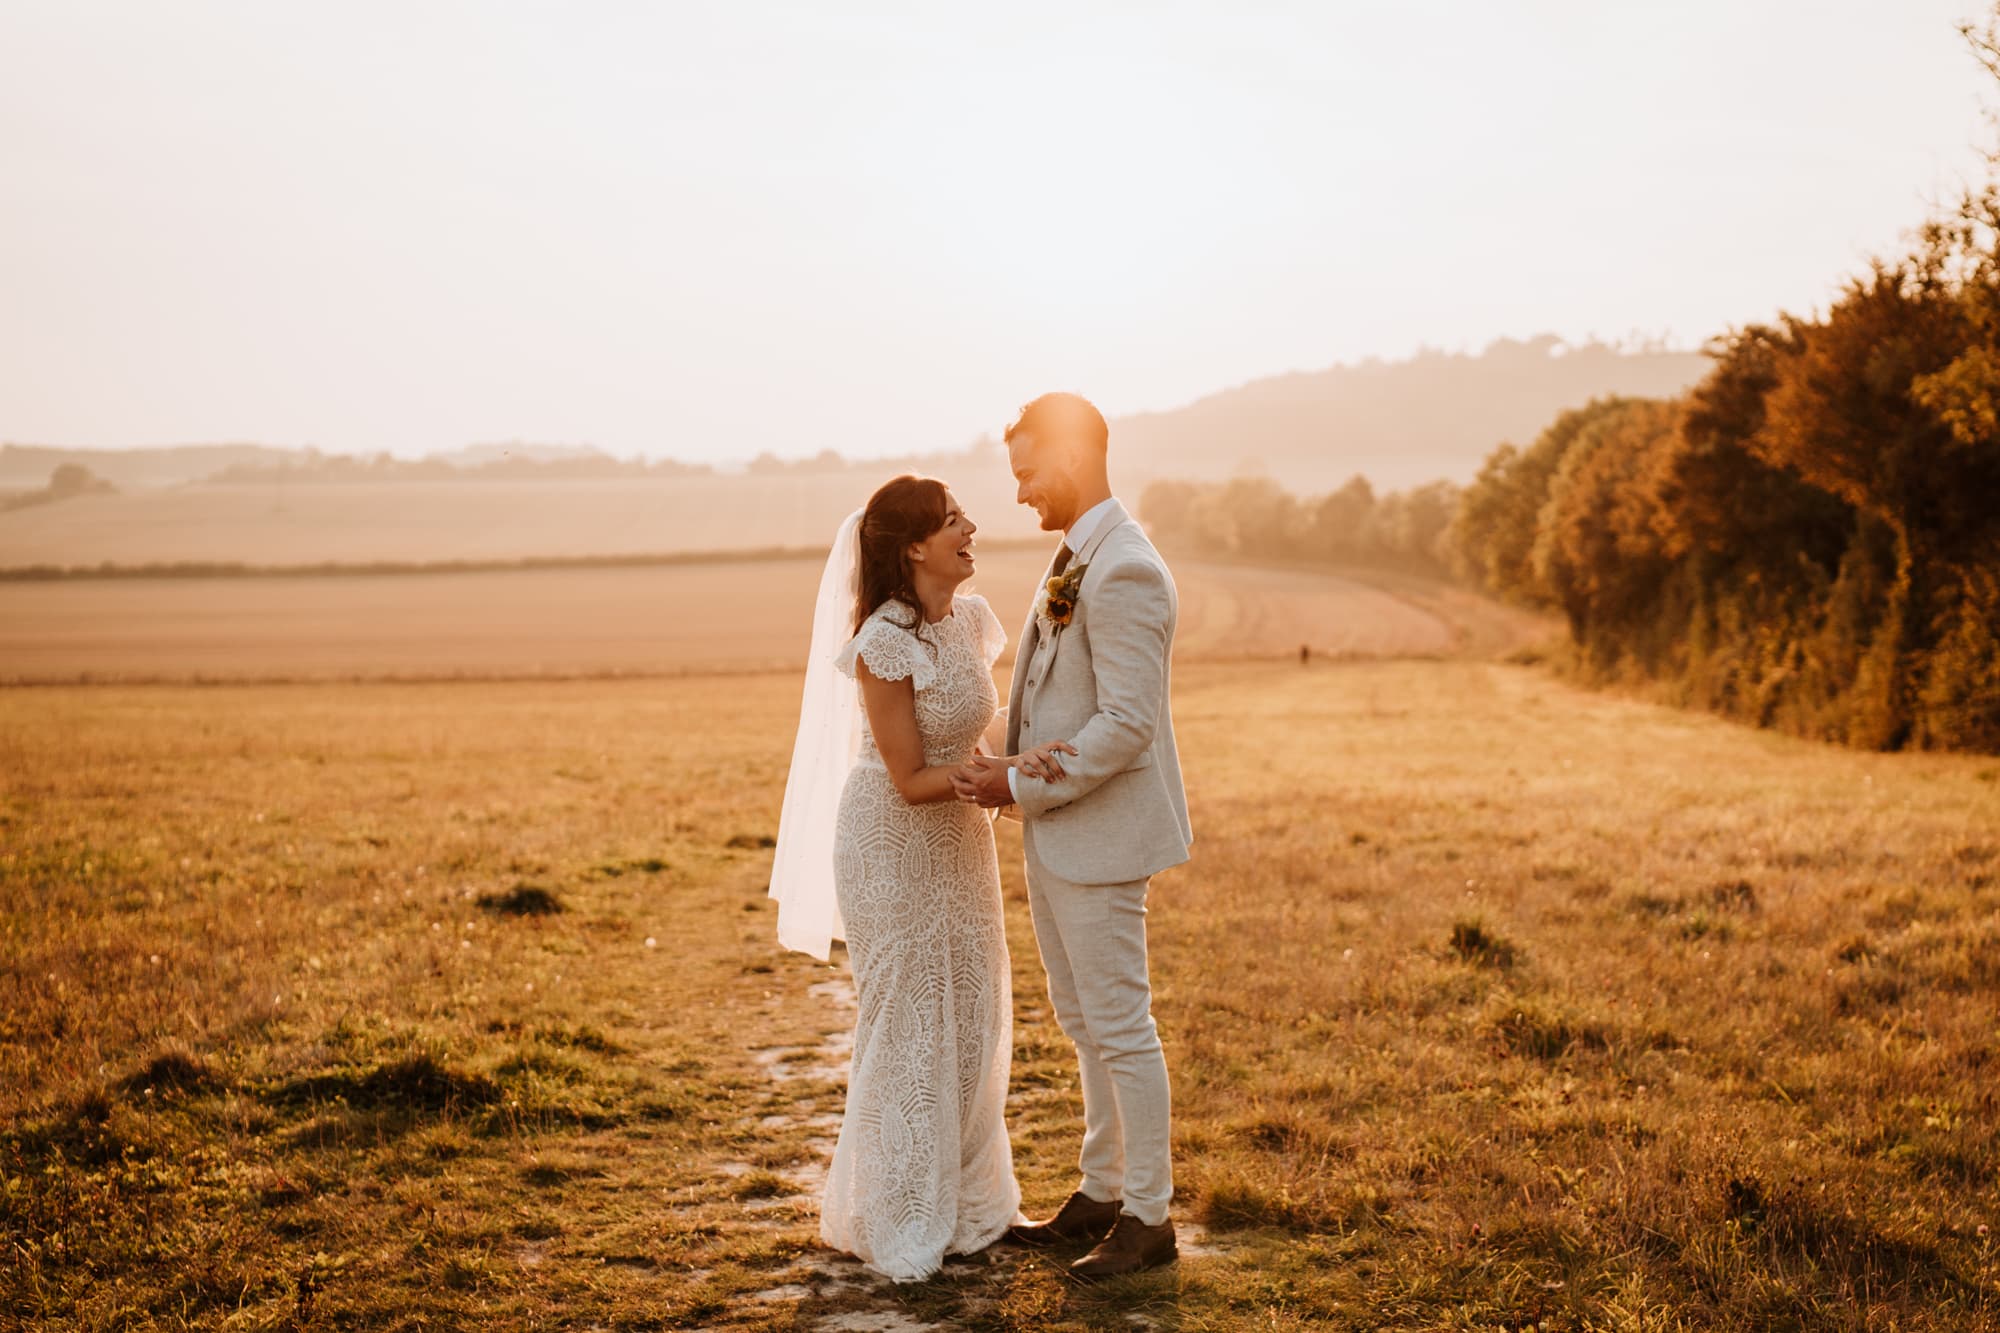 Bride and groom laughing together at sunset in happy relaxed portraits